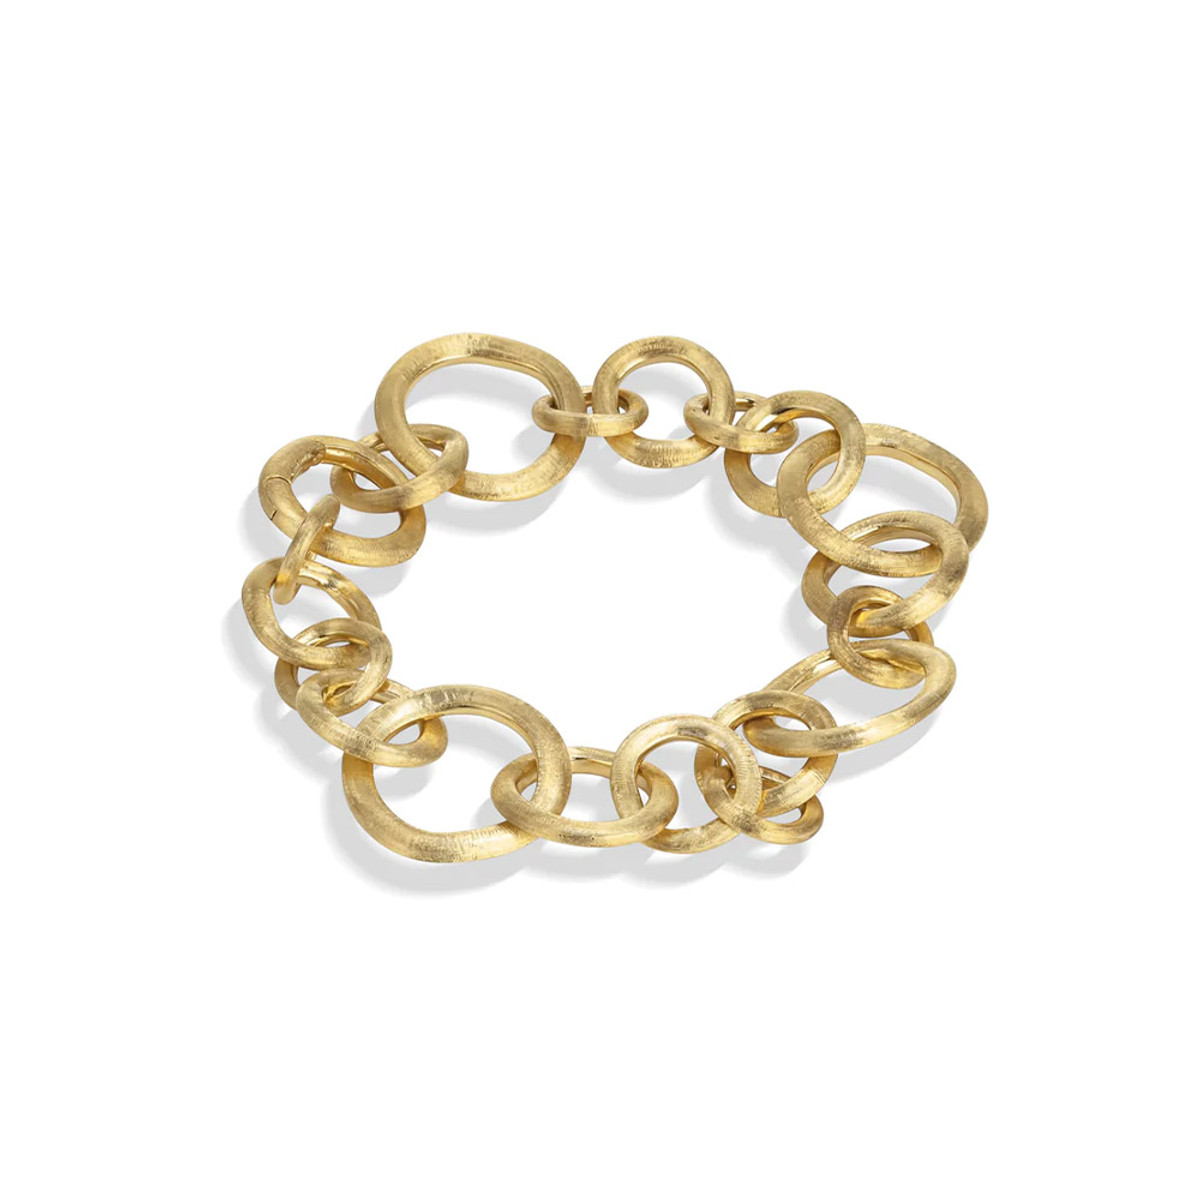 Marco Bicego Jaipur Collection 18K Yellow Gold Small Gauge Bracelet-47095 Product Image